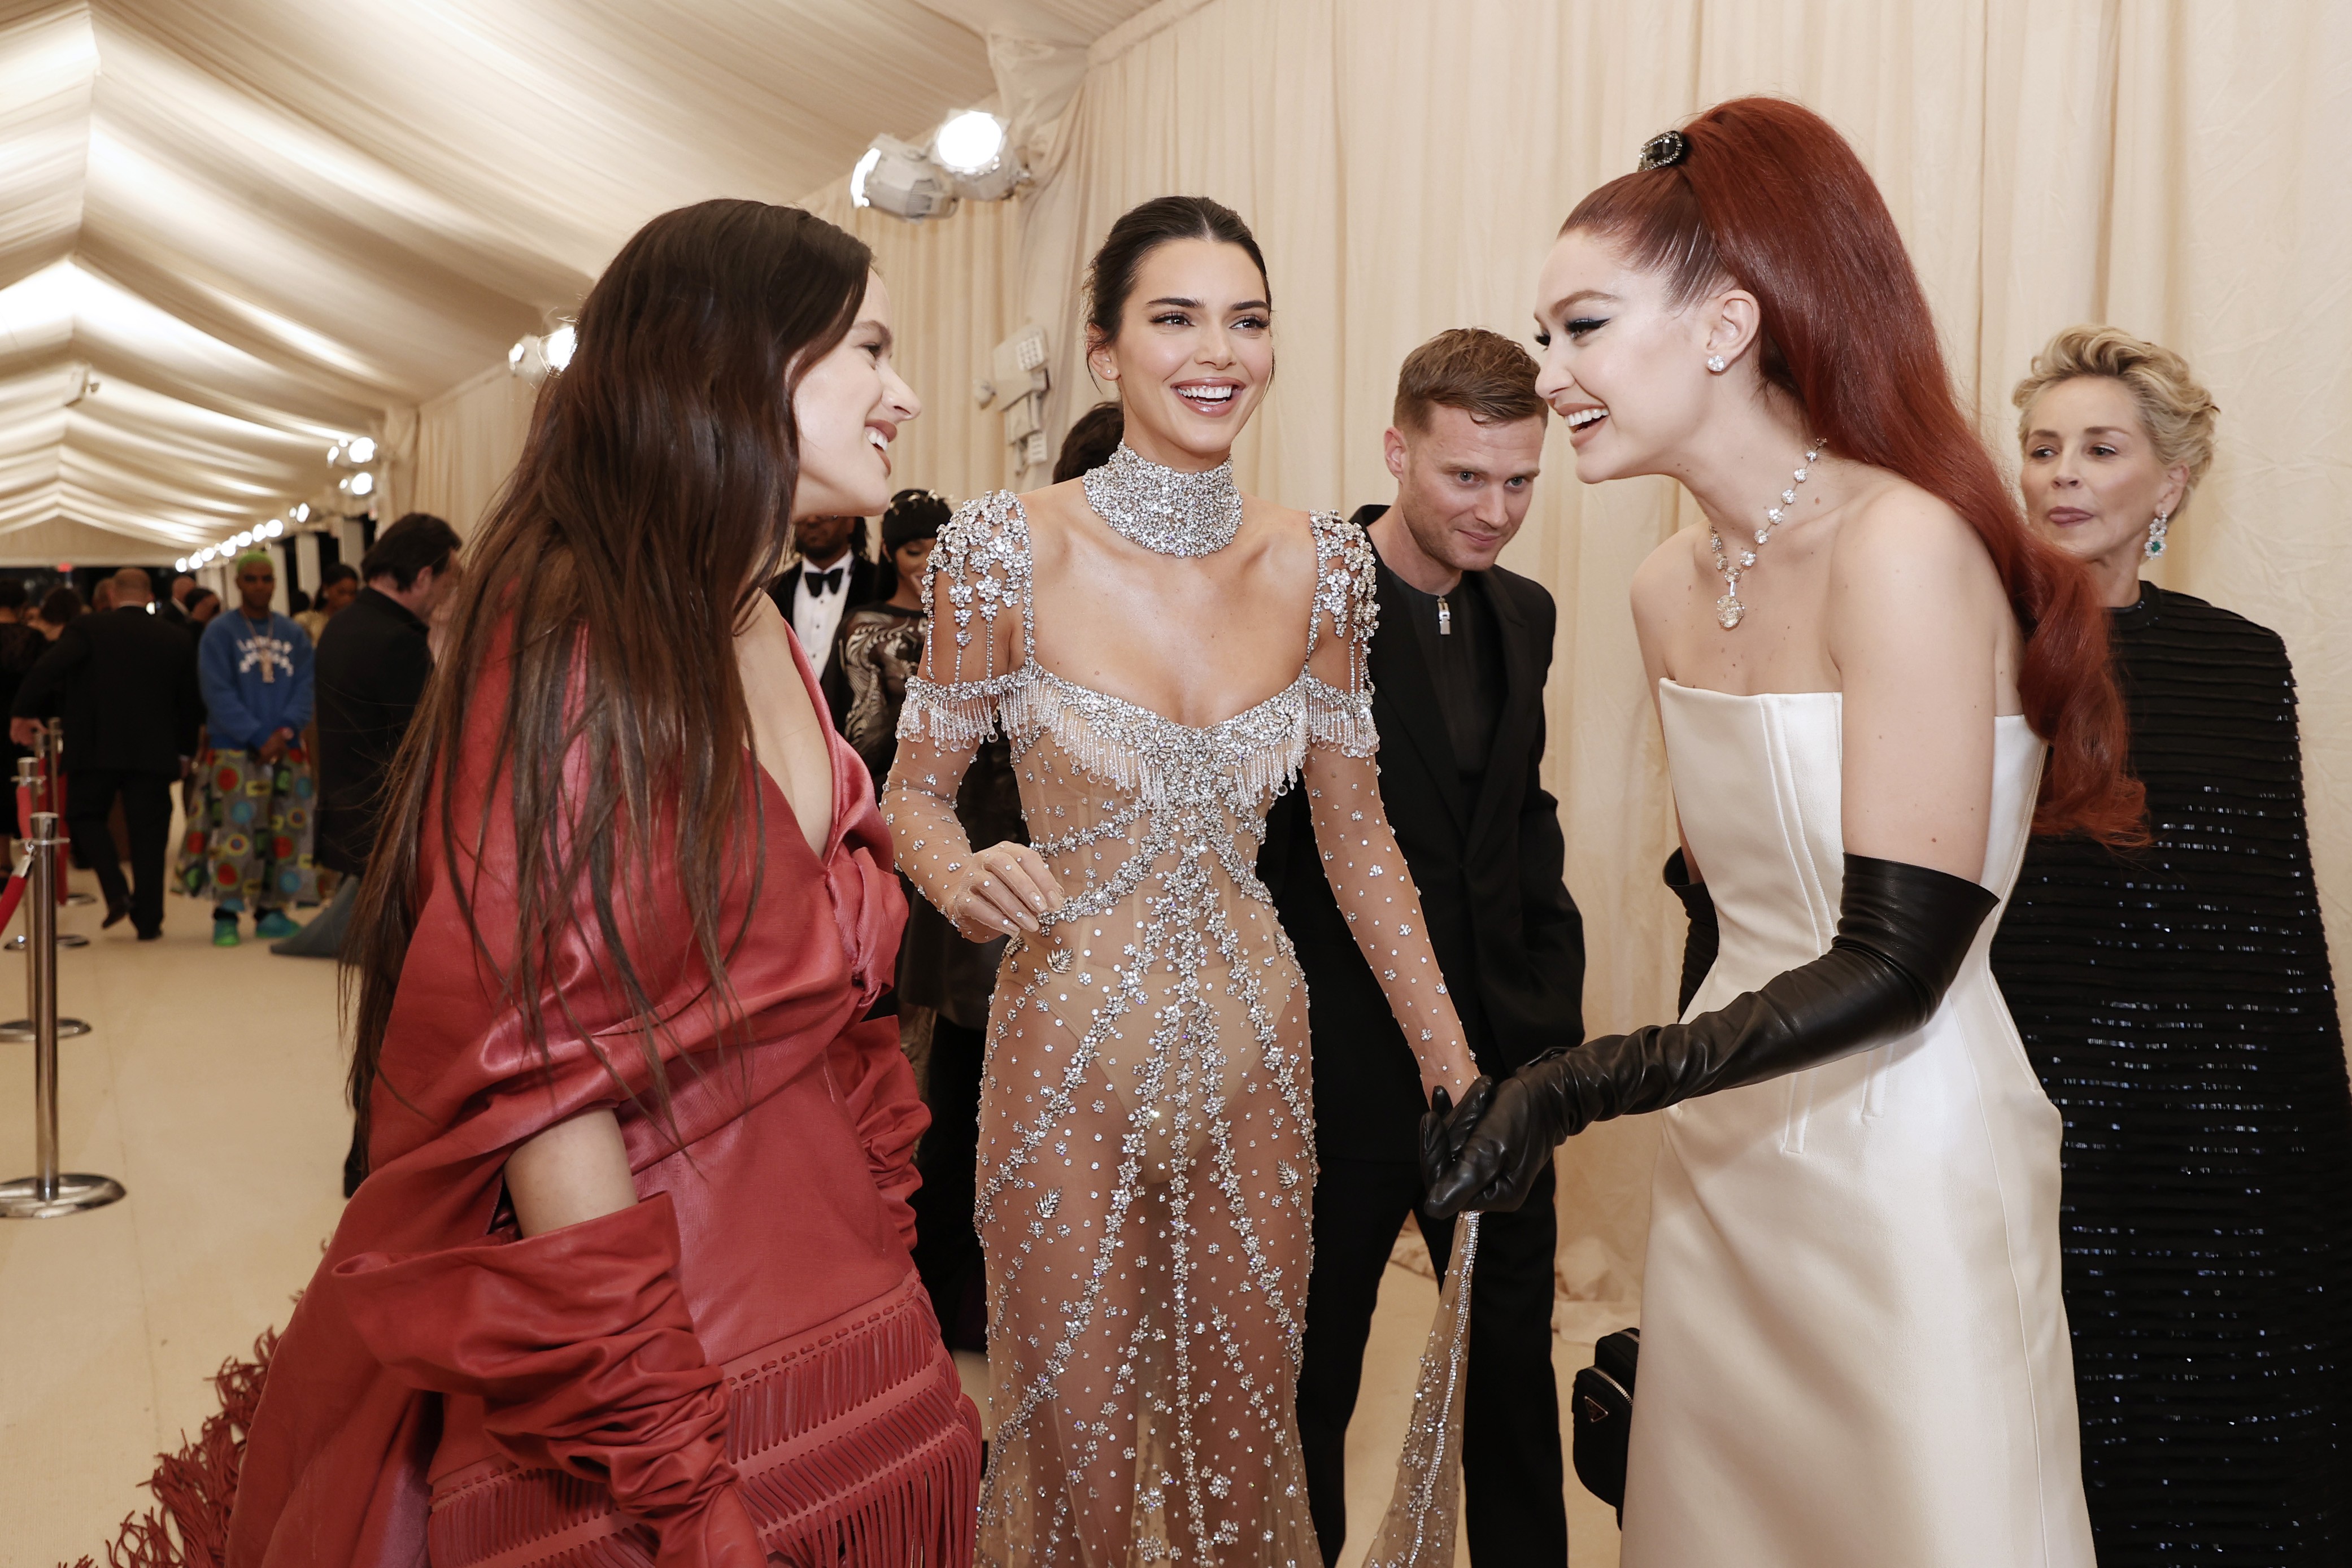 NEW YORK, NEW YORK - SEPTEMBER 13: (L-R) Rosalía, Kendall Jenner and Gigi Hadid attend The 2021 Met Gala Celebrating In America: A Lexicon Of Fashion at Metropolitan Museum of Art on September 13, 2021 in New York City. (Photo by Arturo Holmes/MG21/Getty  (Foto: Getty Images)